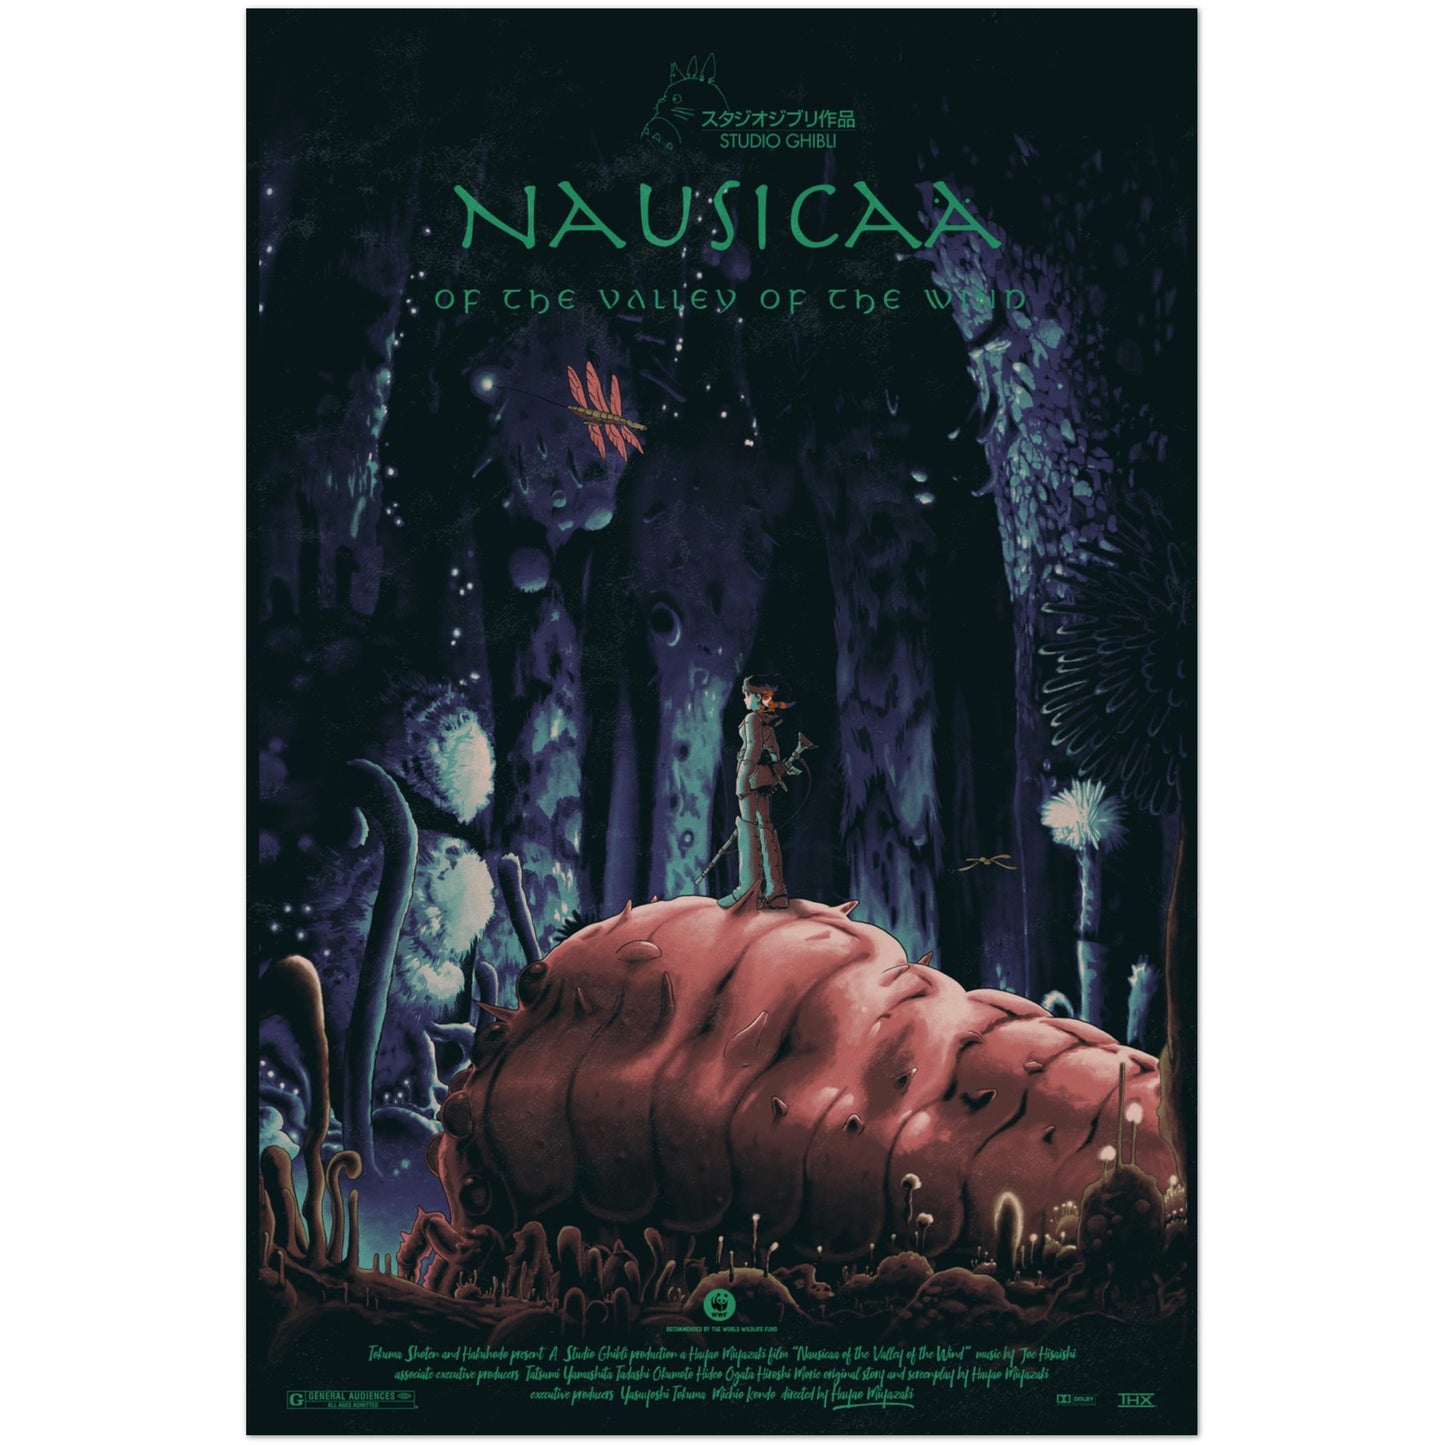 Nausicaa of the Valley of the Wind.